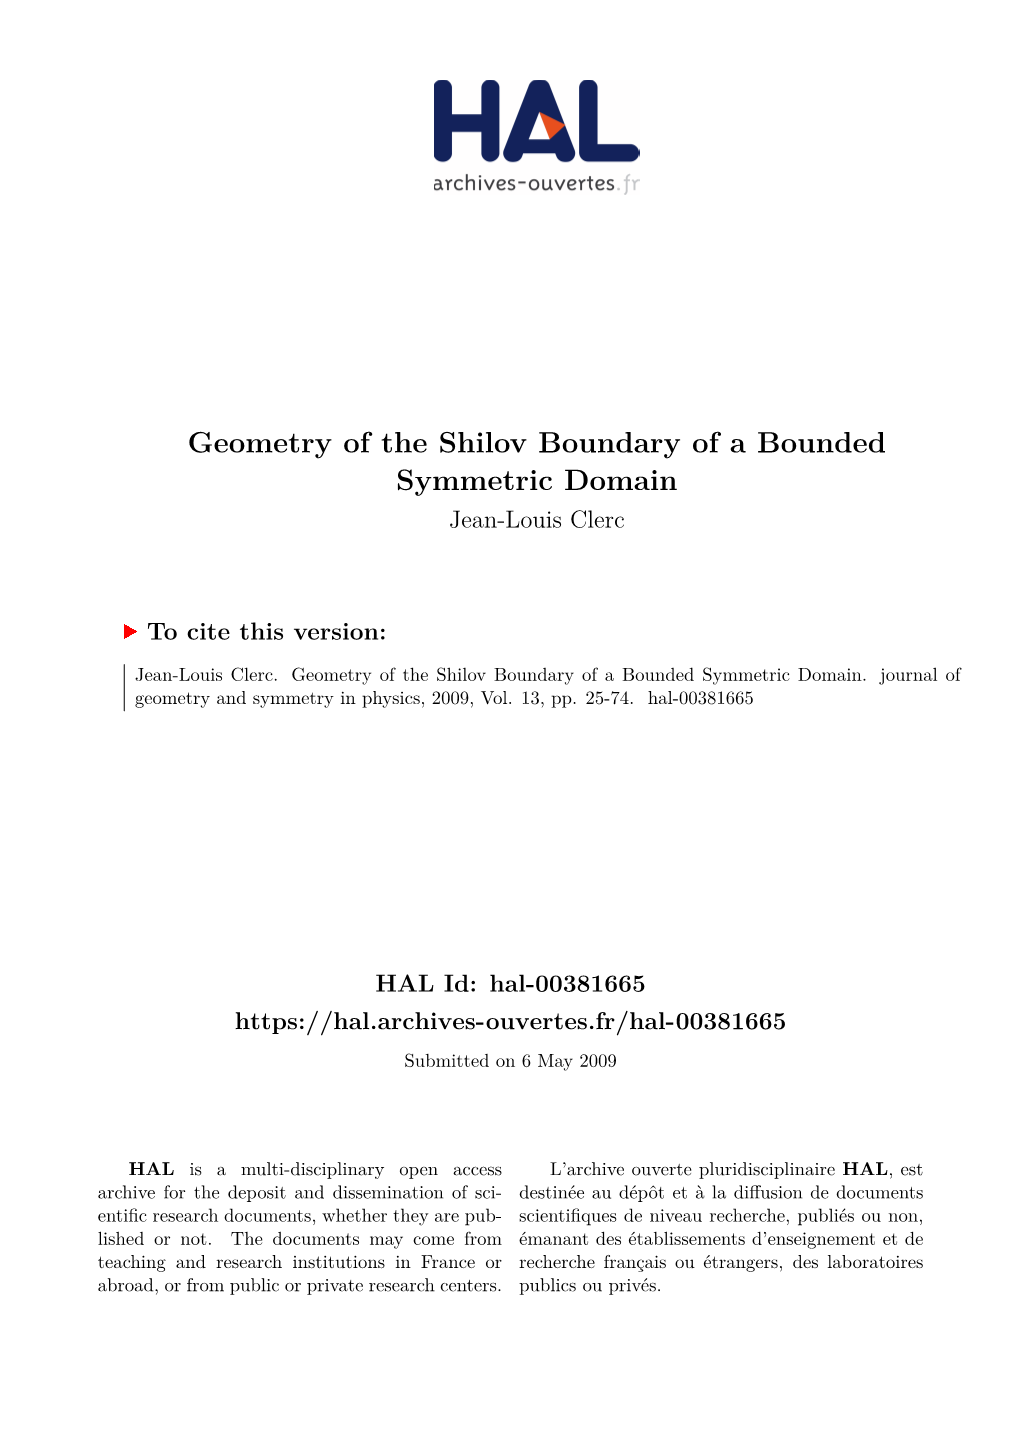 Geometry of the Shilov Boundary of a Bounded Symmetric Domain Jean-Louis Clerc